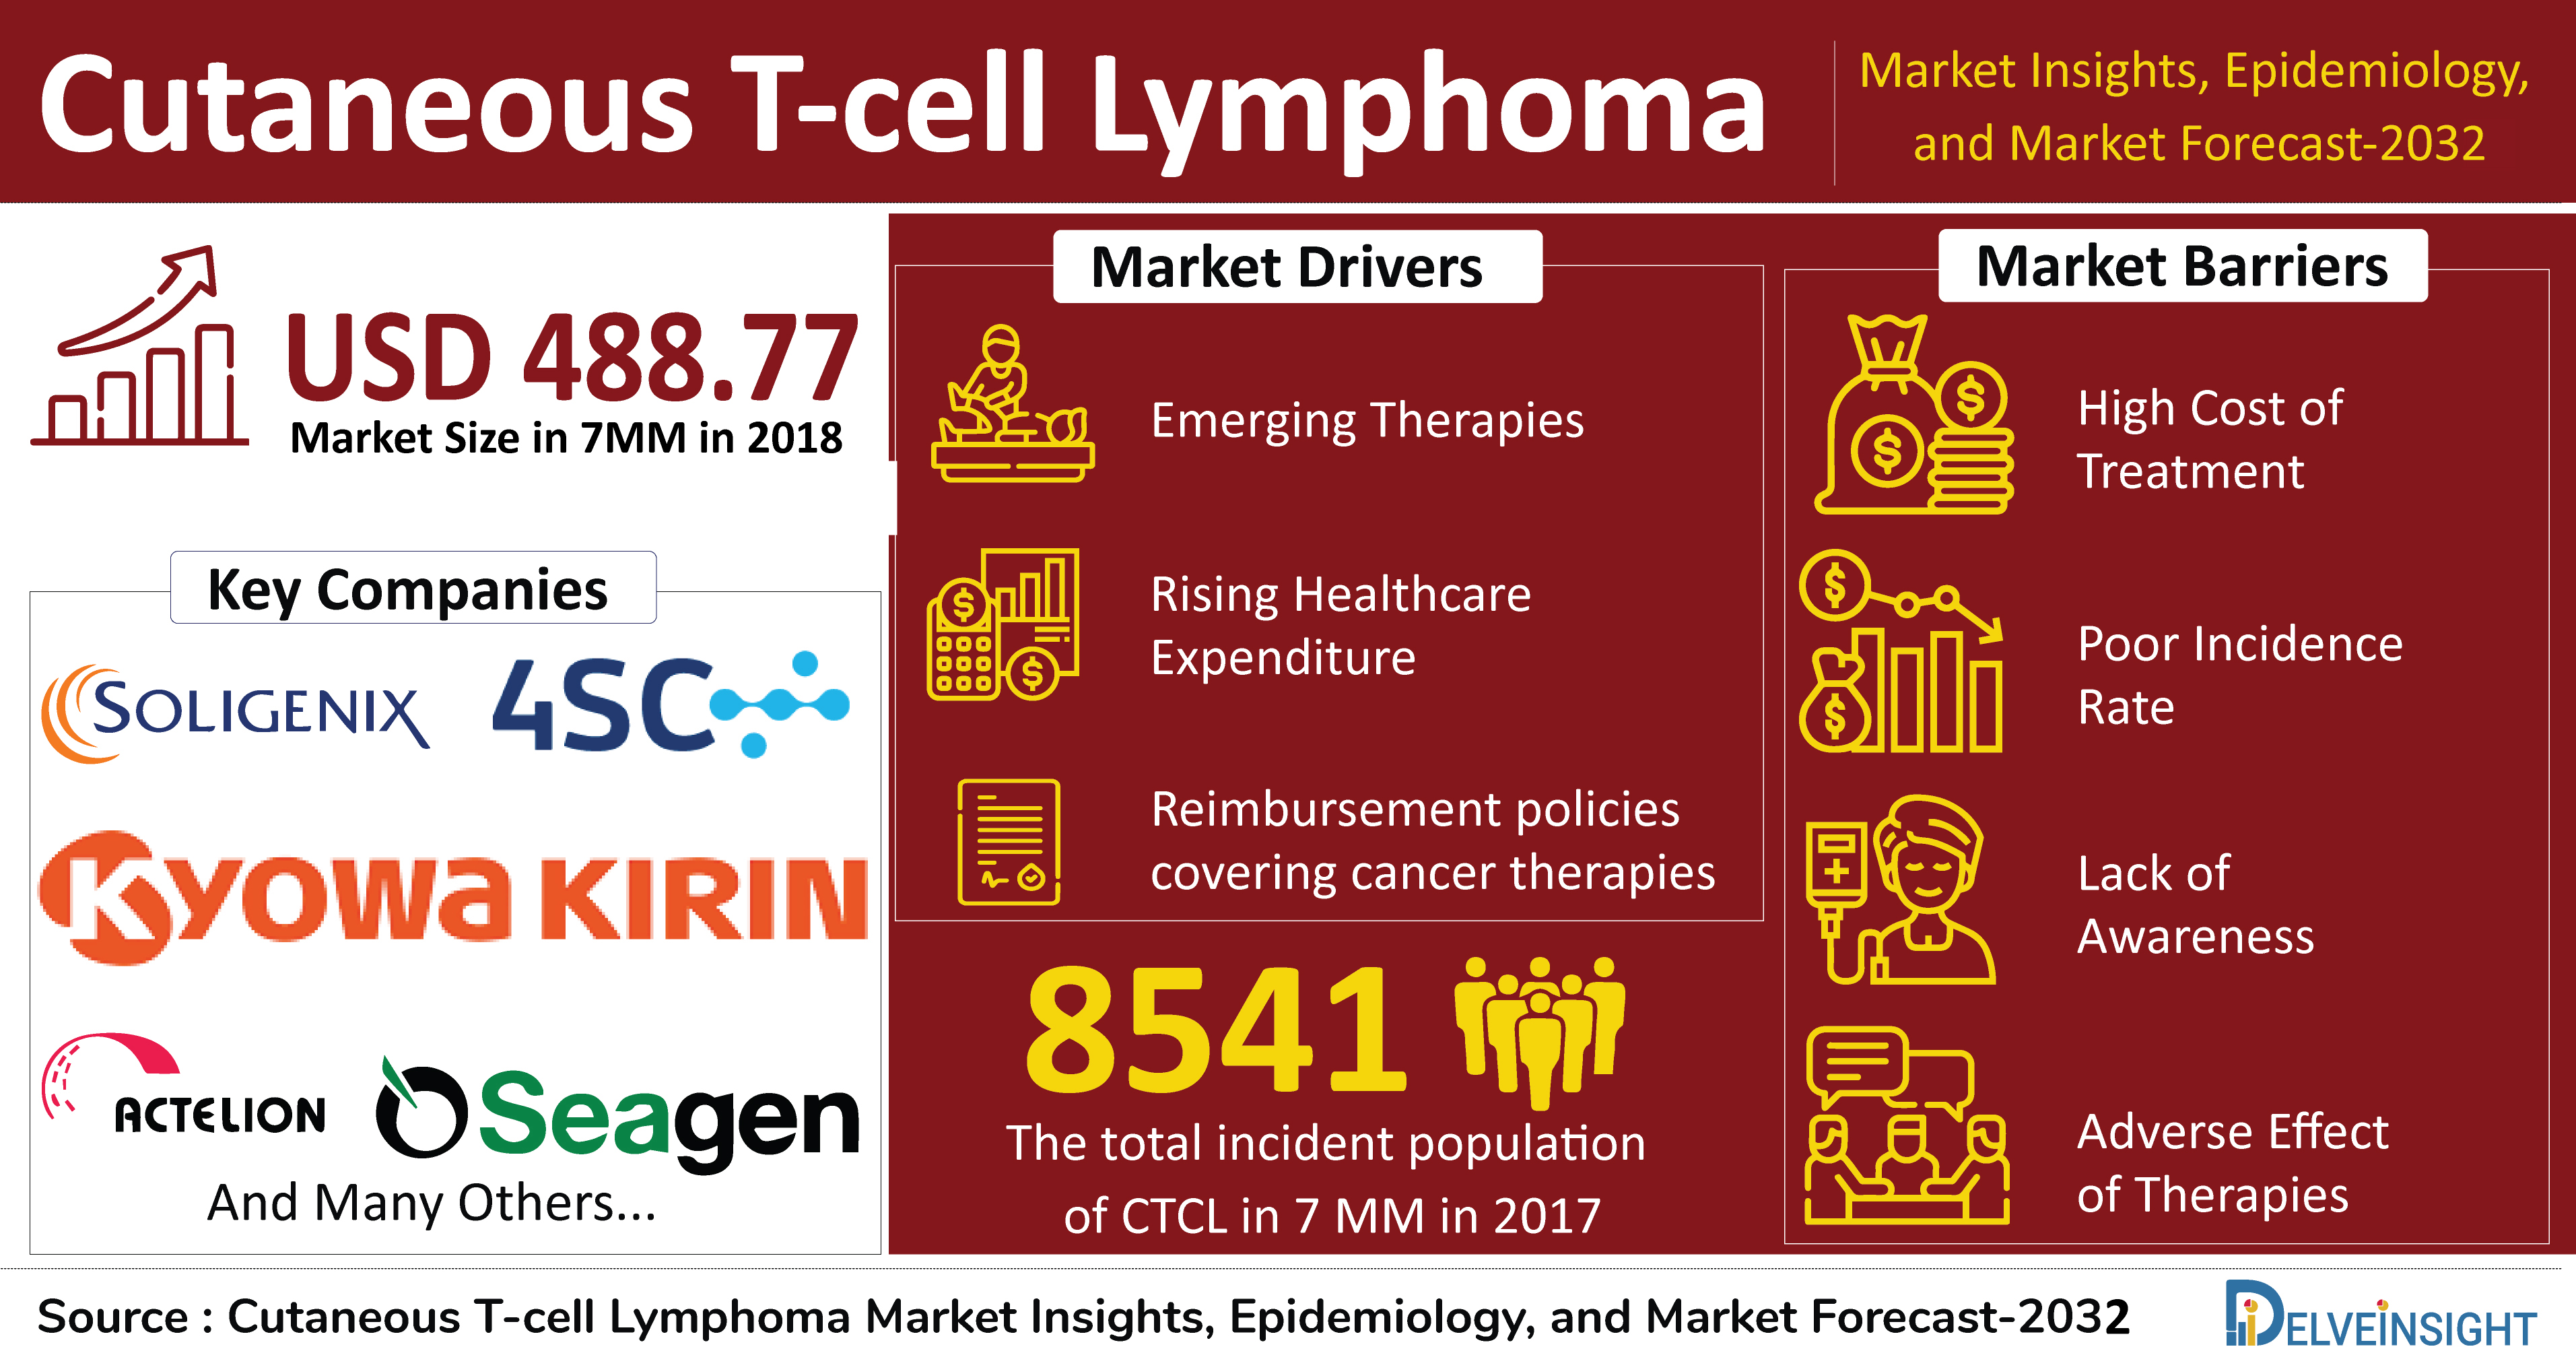 Cutaneous T-Cell lymphoma Market Size, Epidemiology, Pipeline Therapies, Treatment and Companies by DelveInsight | Celgene, Galderma, Innate Pharma, Eisai Inc., Novartis and Others.